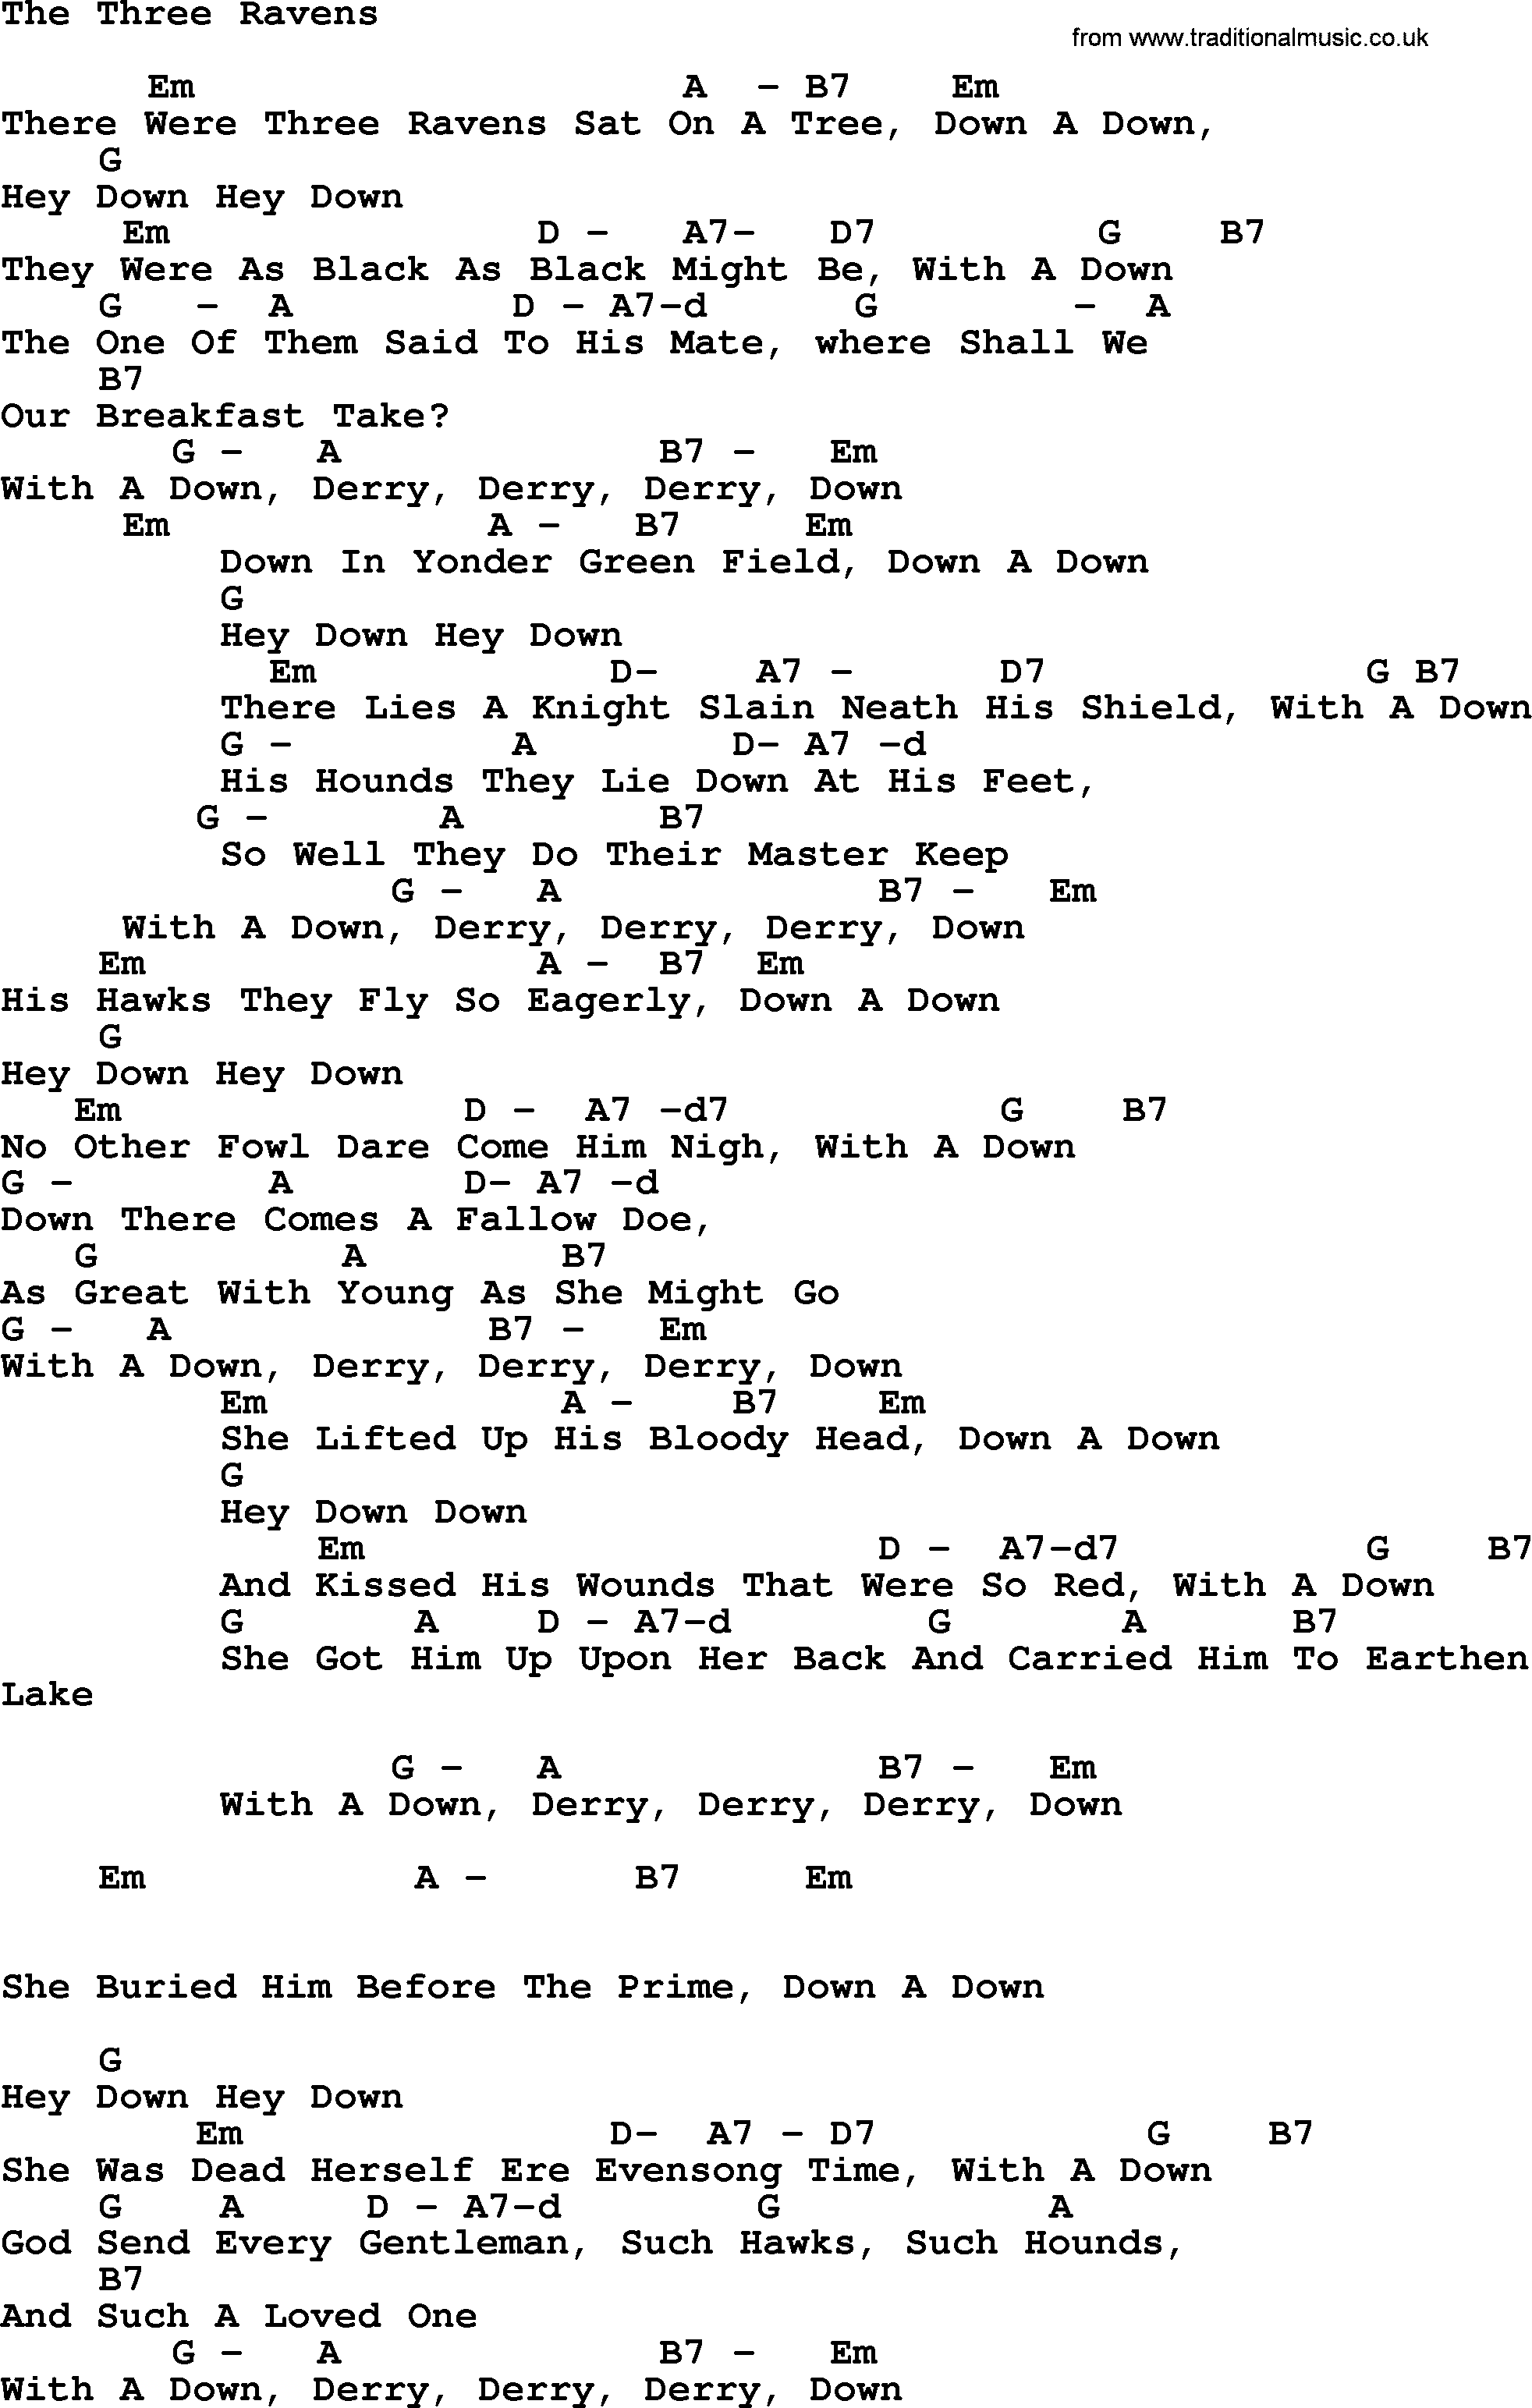 Peter, Paul and Mary song The Three Ravens, lyrics and chords